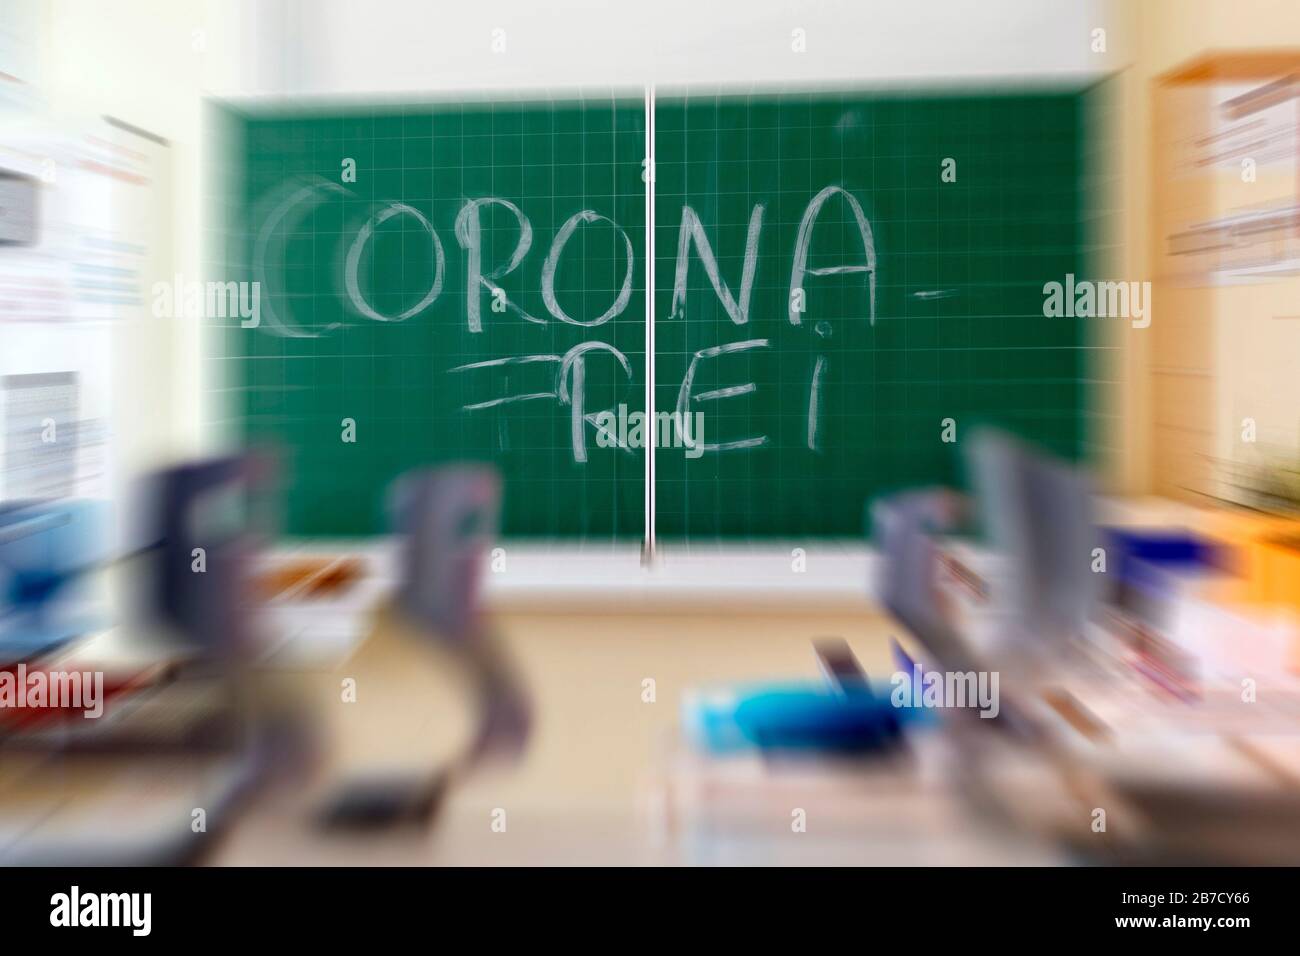 Corona-free at a school in Südstadt Cologne (Germany) Stock Photo